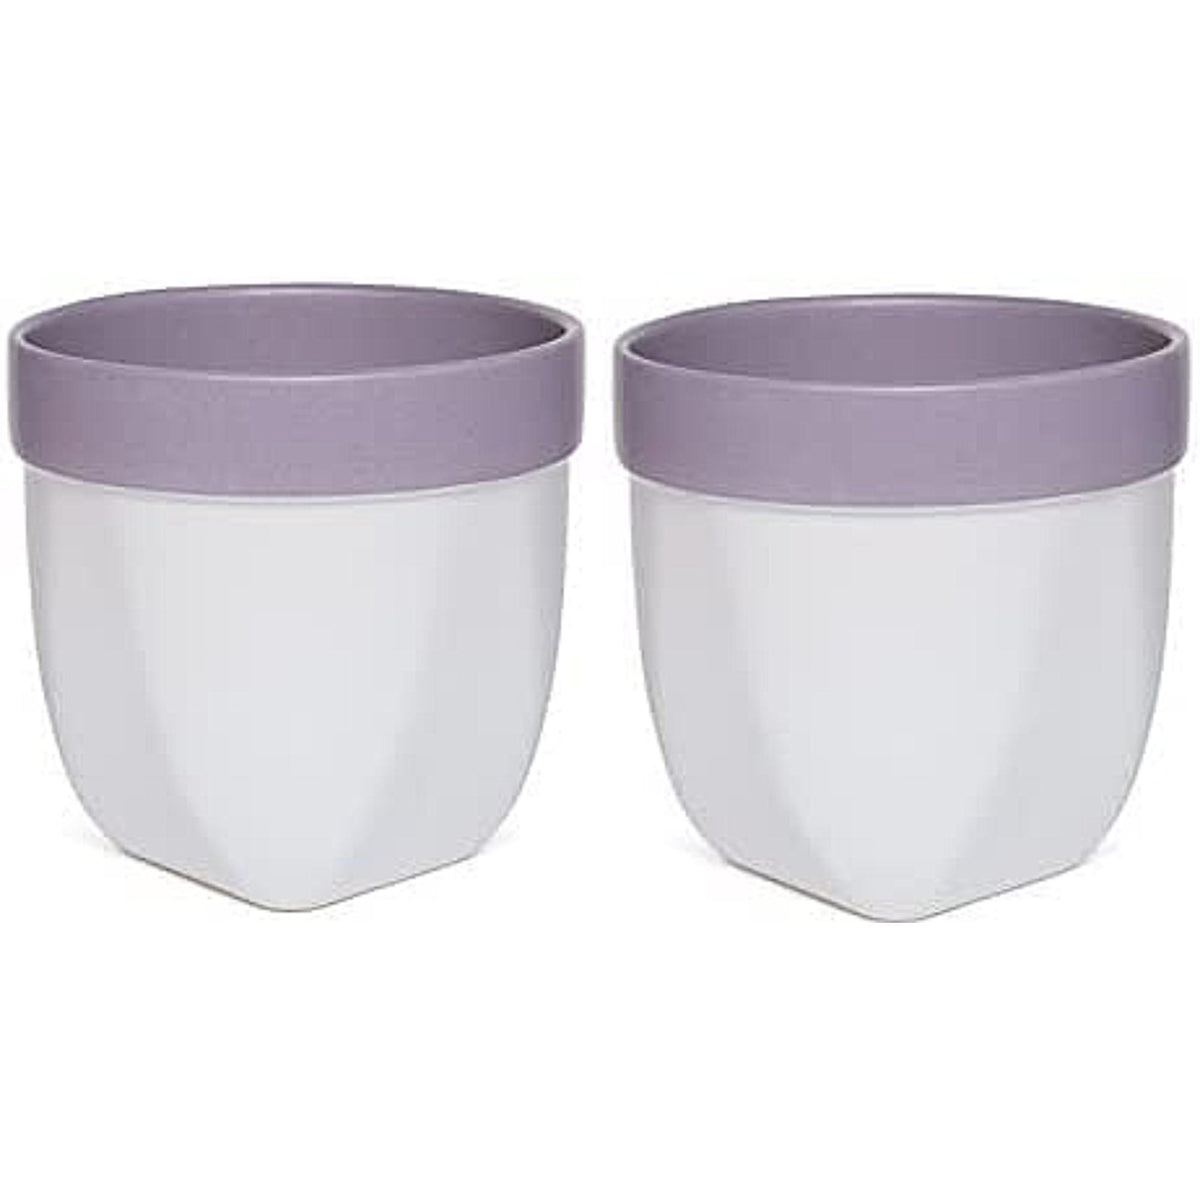 HOSLEY® Clay Grower Versa Pot , Set of 2 , 4.7 inches High each